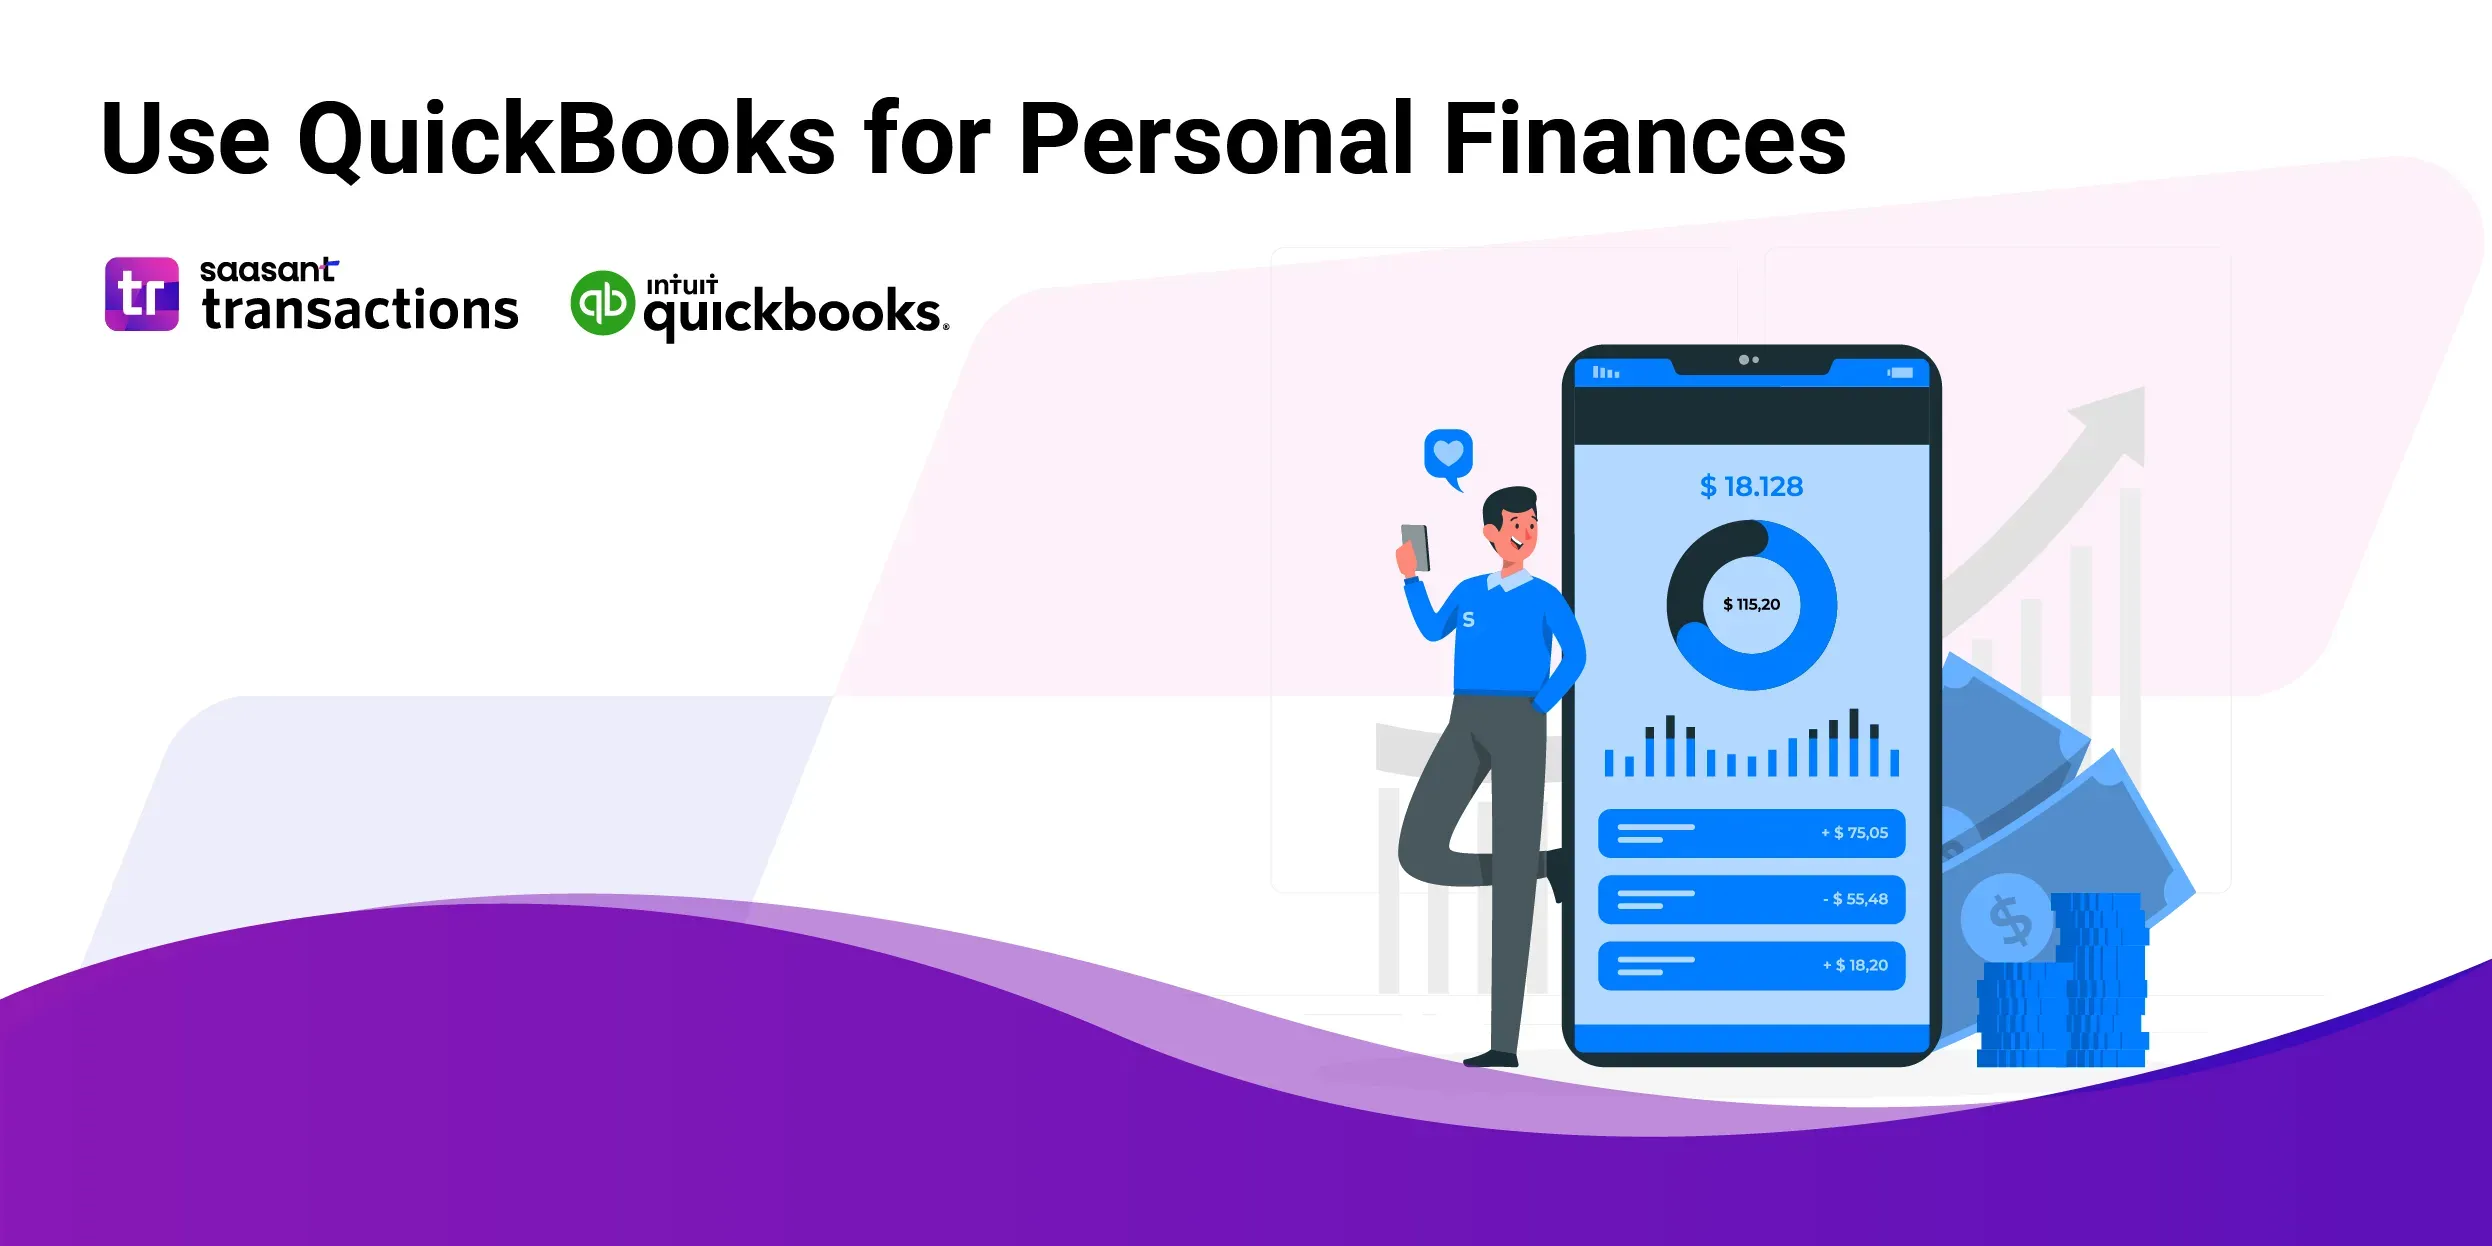 How to Use QuickBooks for Personal Finances